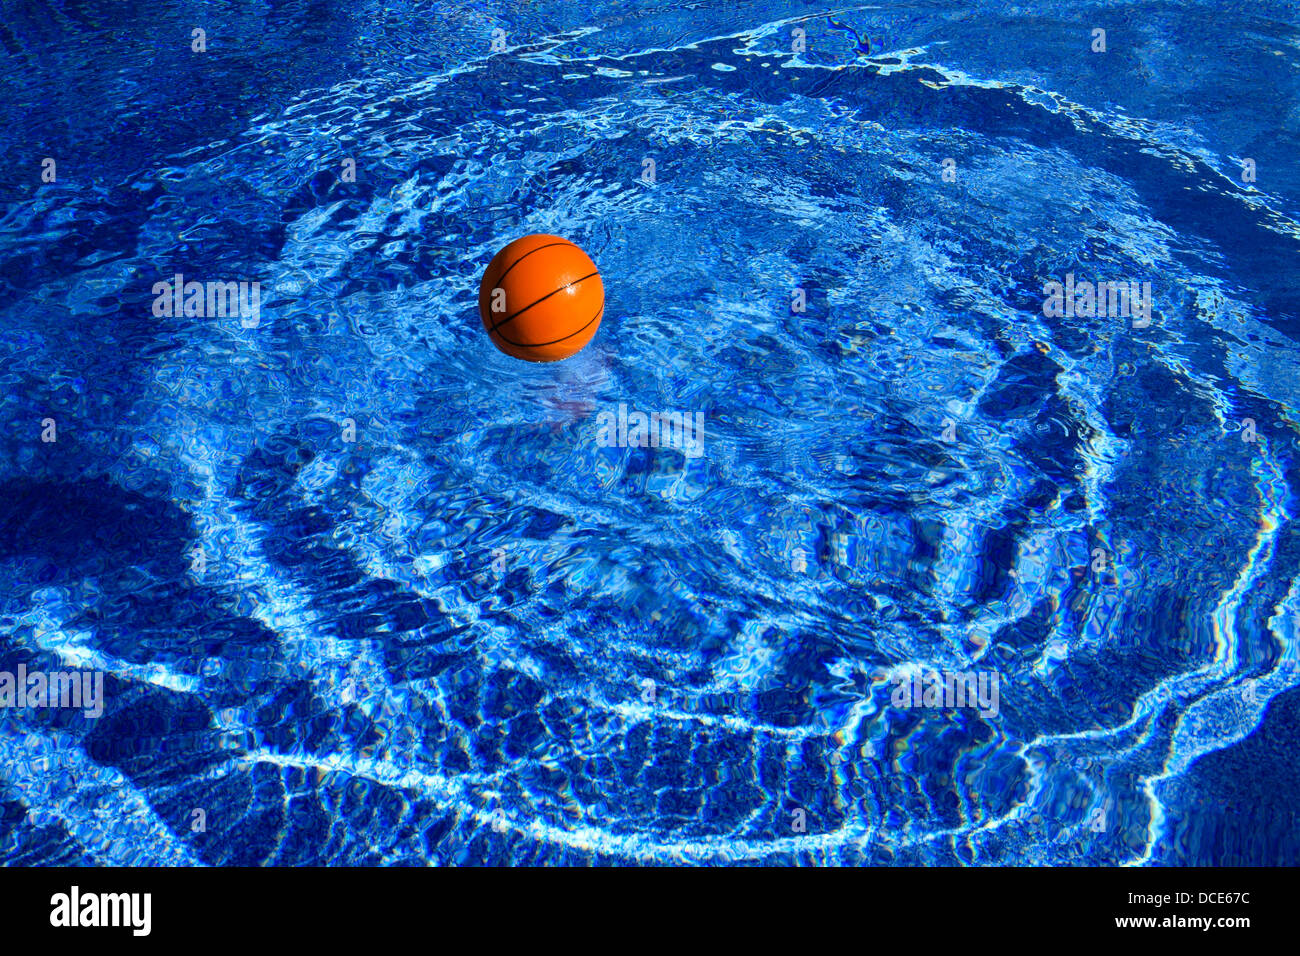 A Basketball Creates Concentric Ripples In Deep Blue Swimming Pool Water Stock Photo